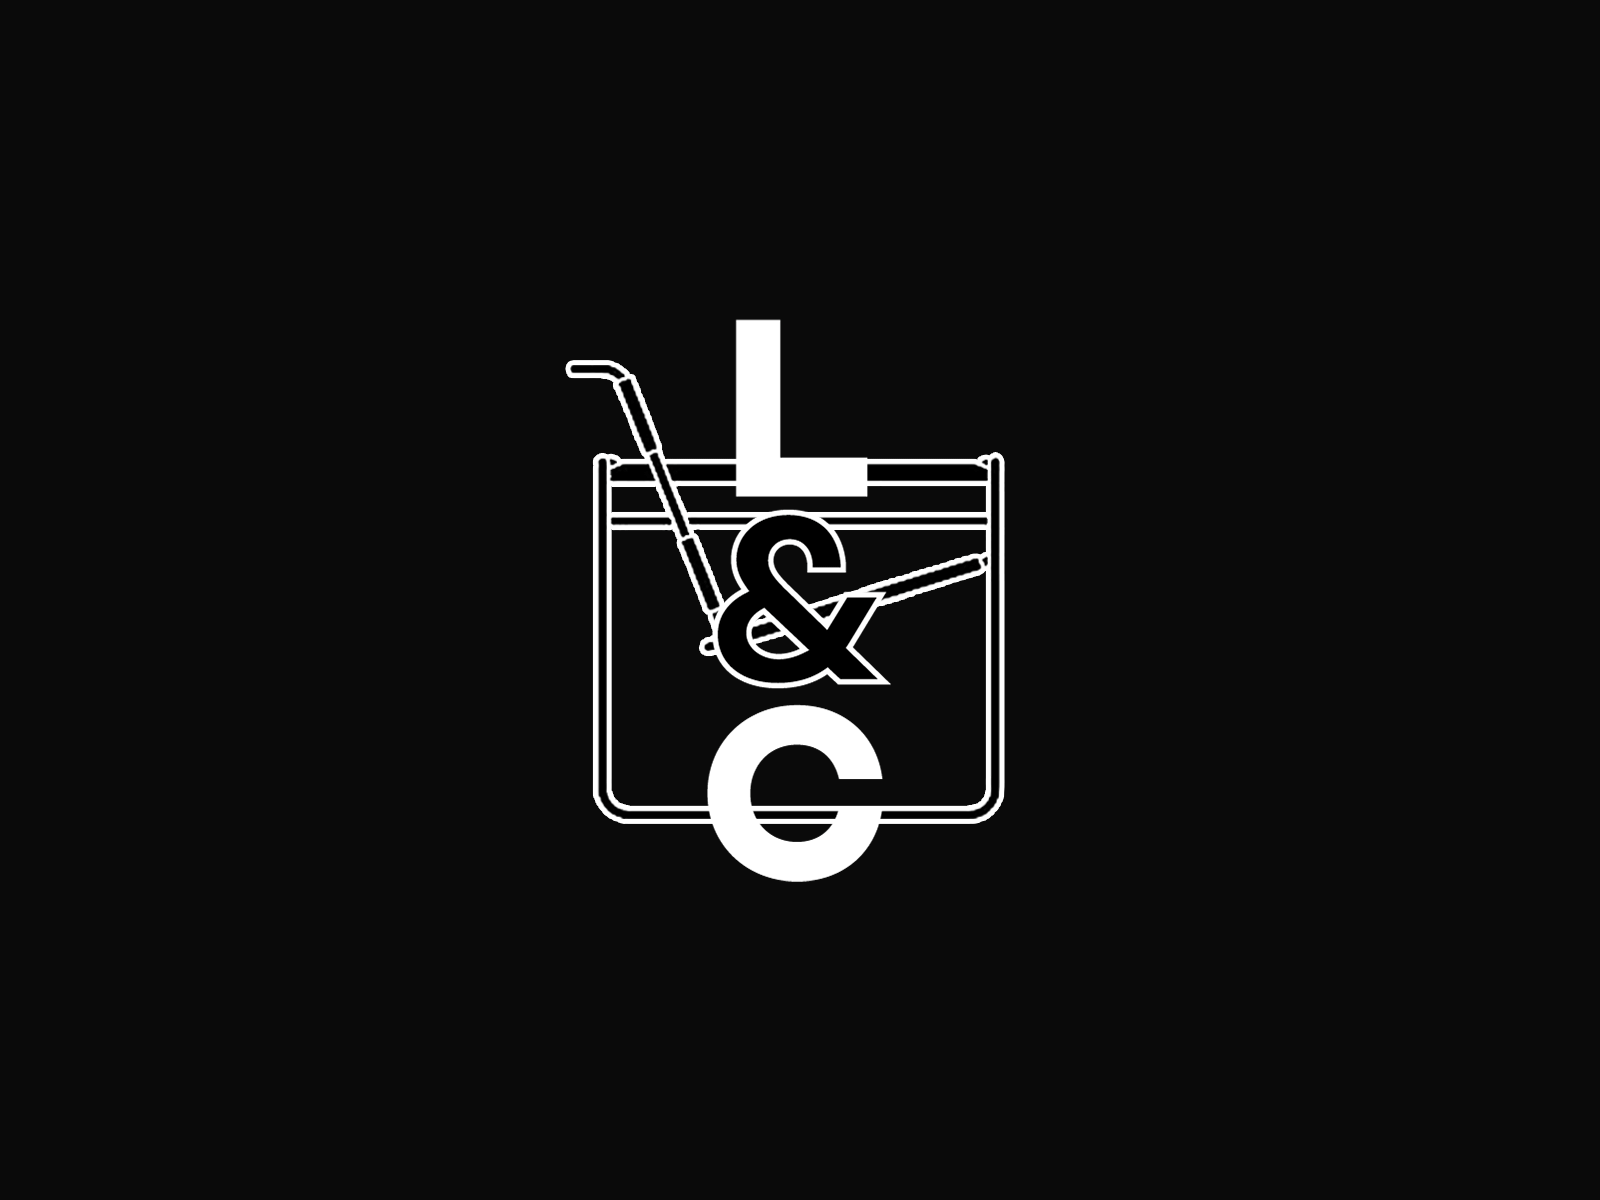 L&C (Leather & Chome) Logo Animation